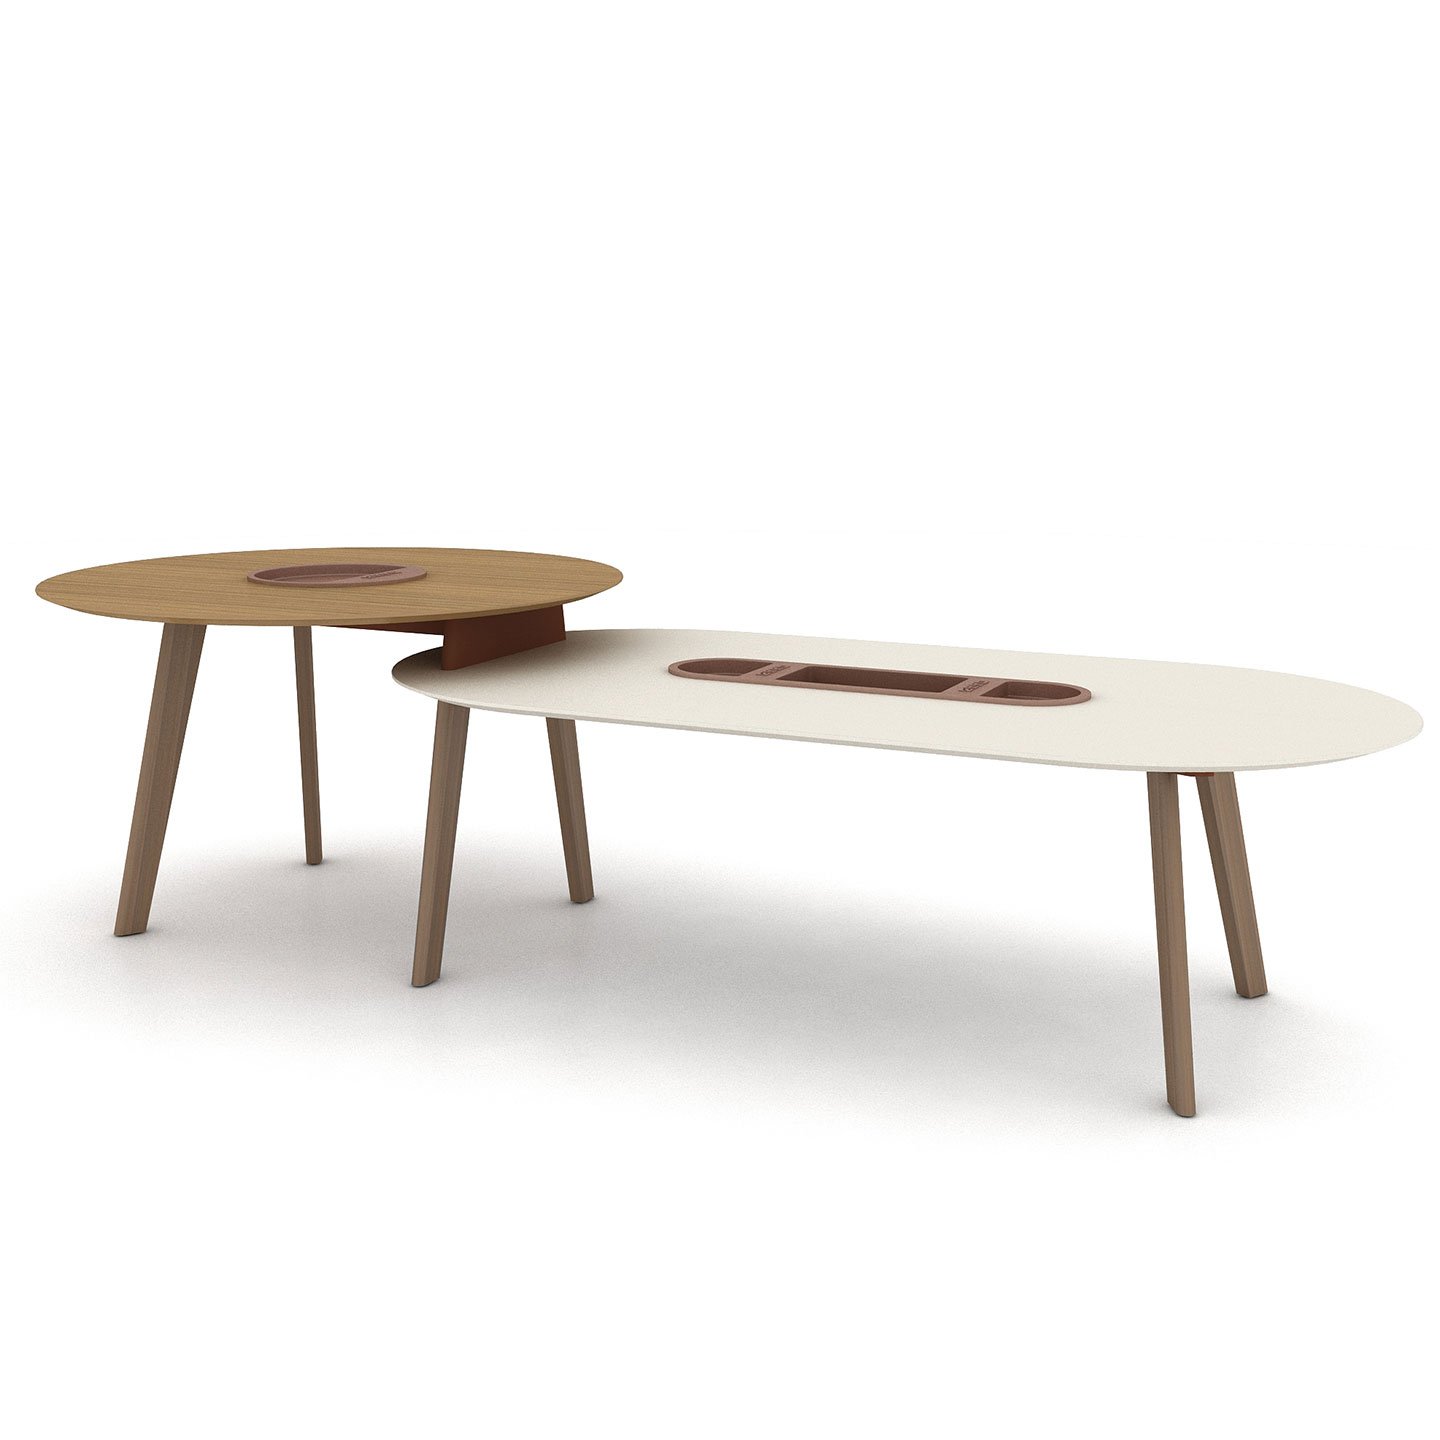 Haworth Immerse Table with 6 legs and circular top and lower elongated round top